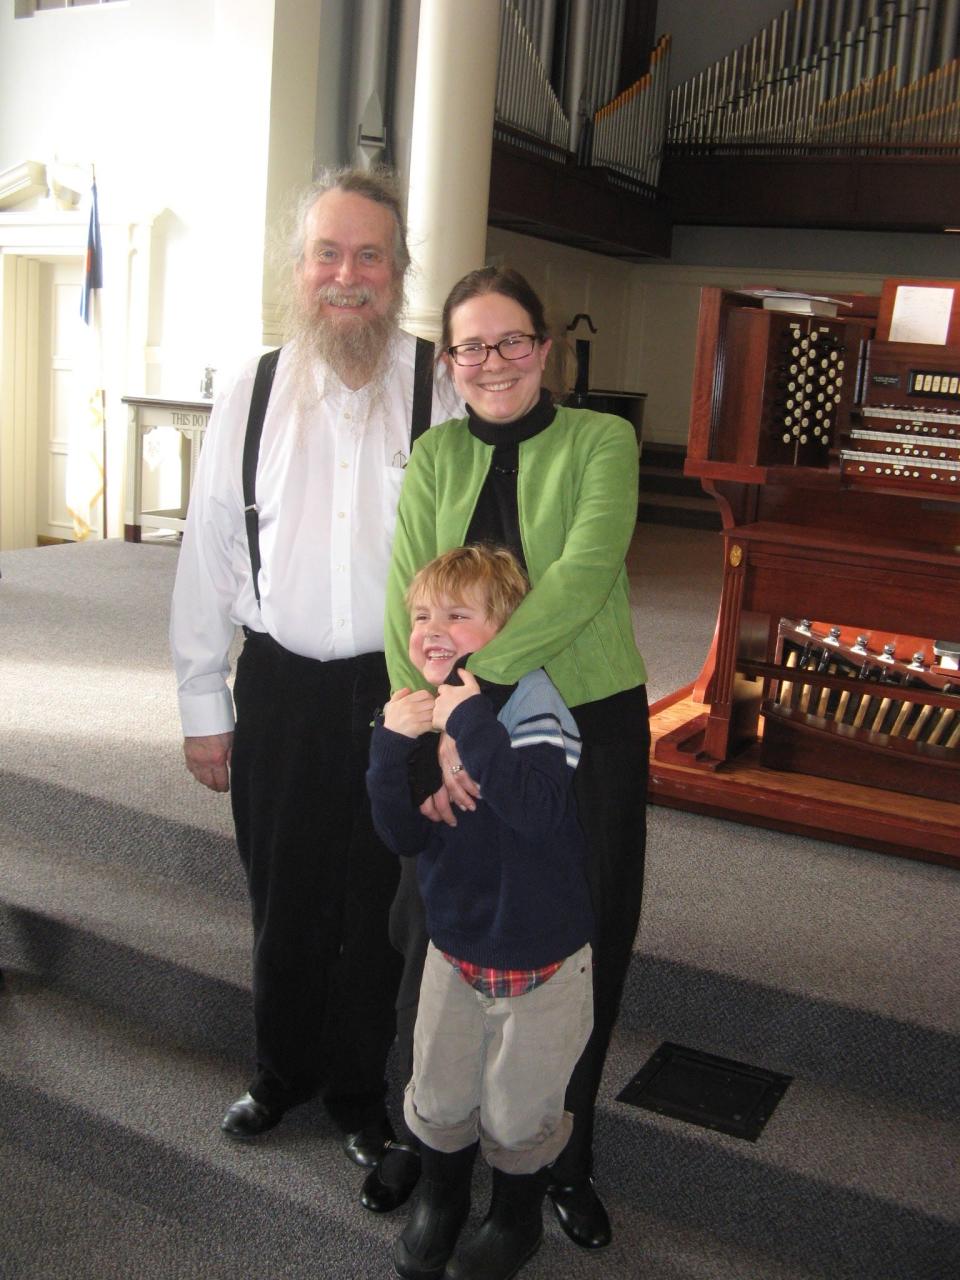 Rhonda Sider-Edgington poses with her son and Steve Jenkins at an American Guild of Organists concert at Harderwyck Ministries in Holland in 2014.